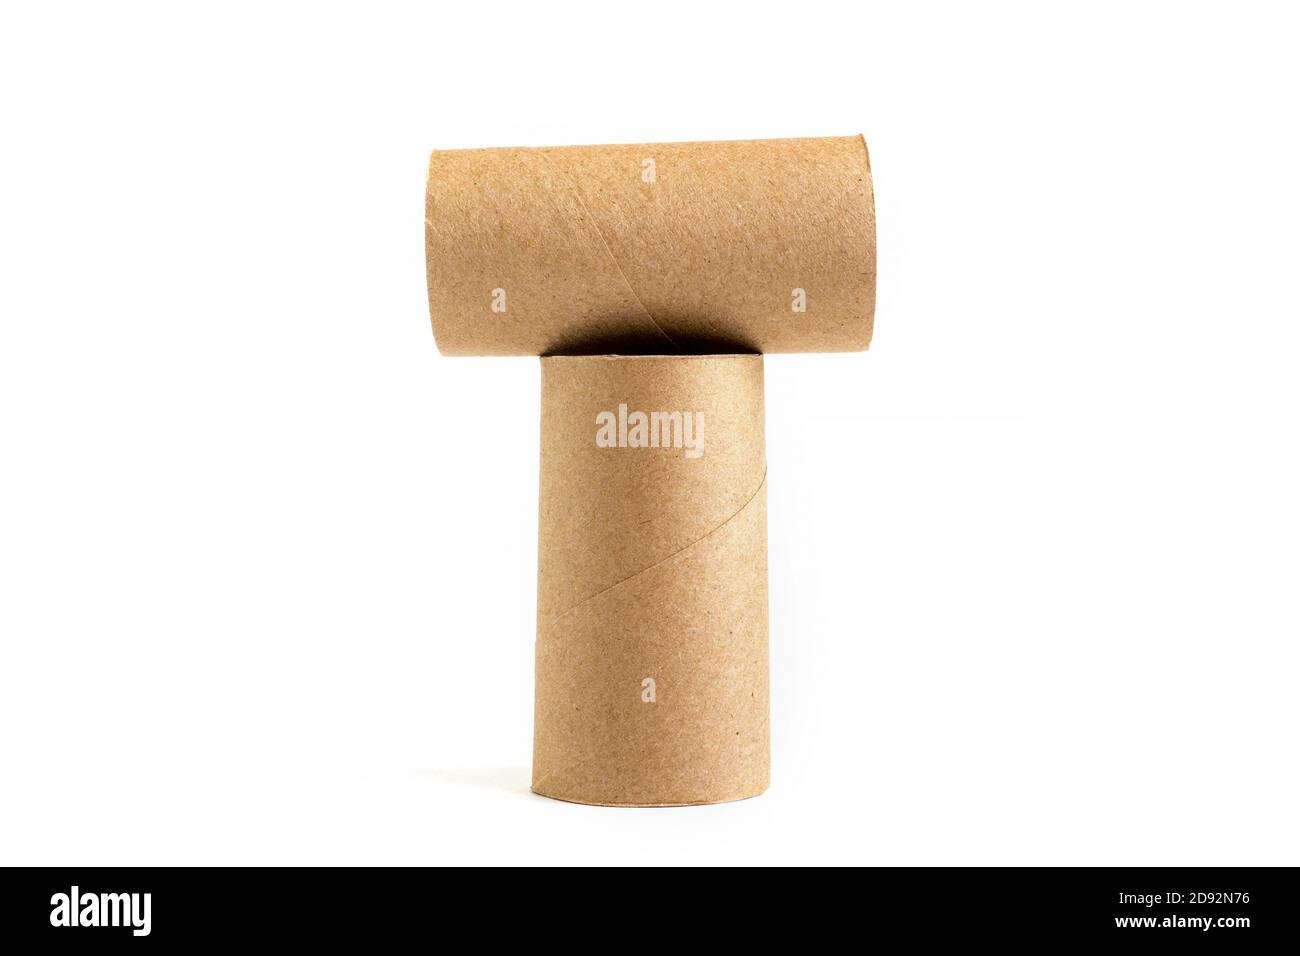 Letter T from composition of two cardboard paper tubes on white background. Close-up of empty toilet rolls Stock Photo